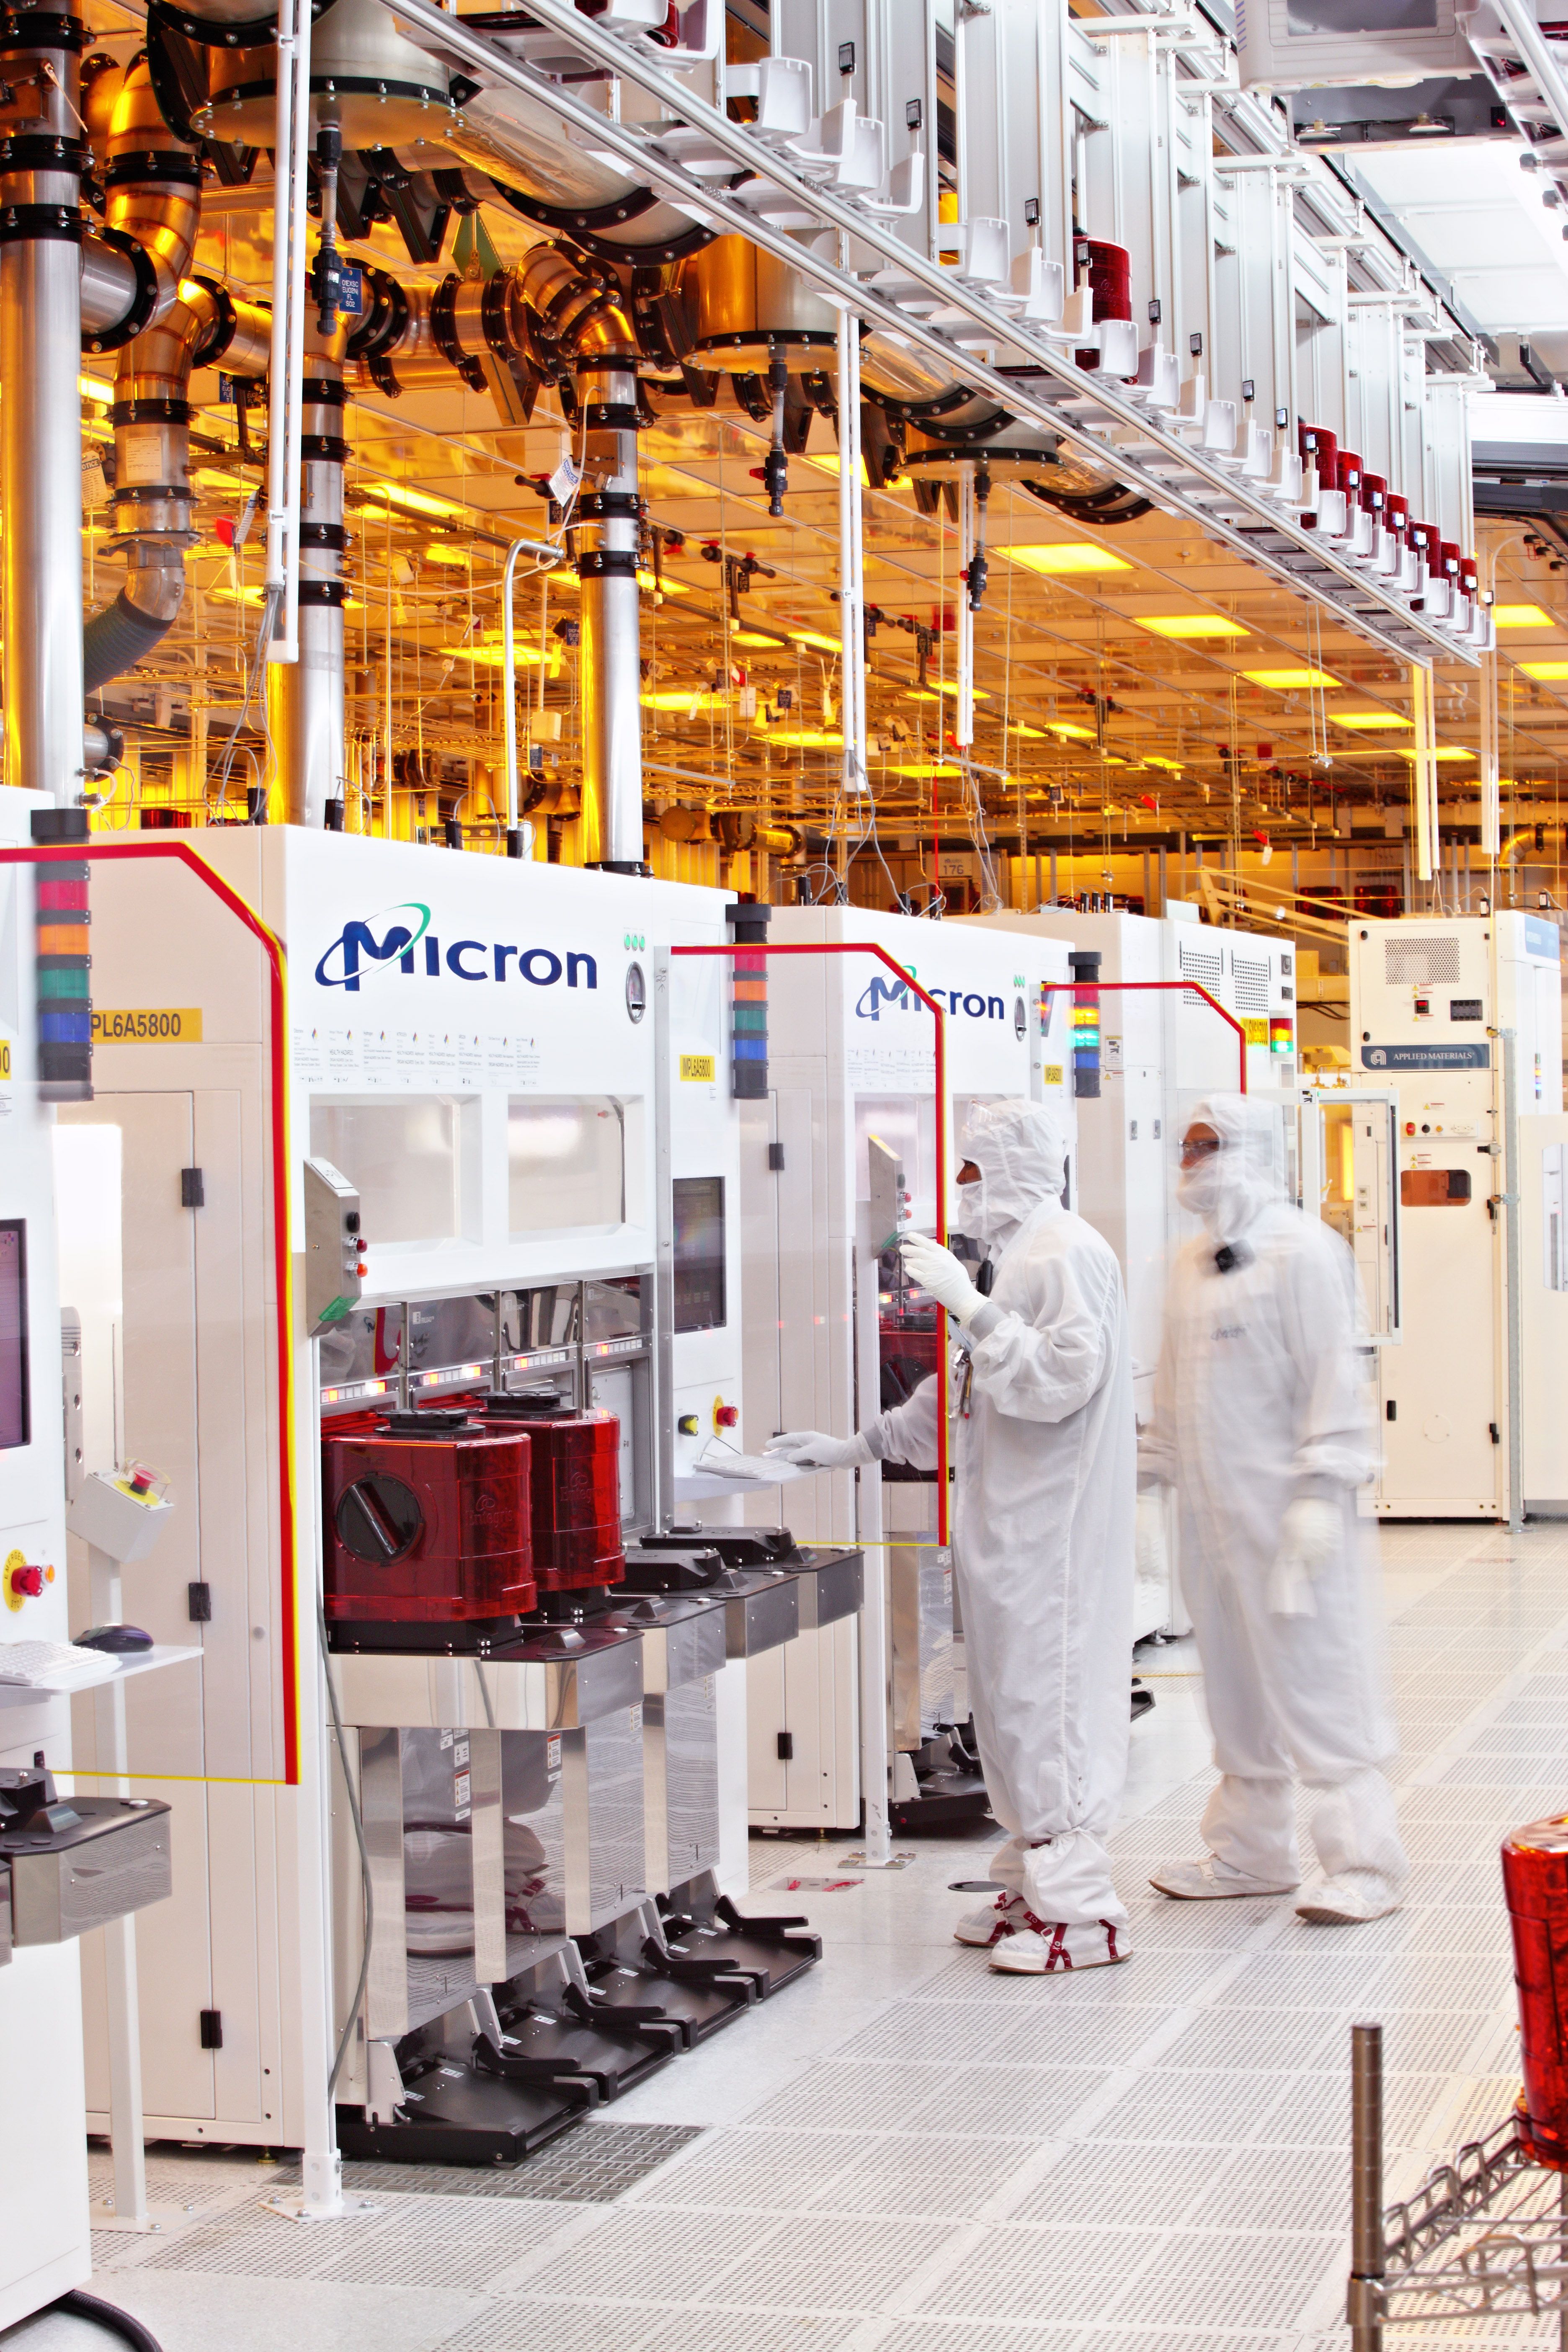 Micron workers